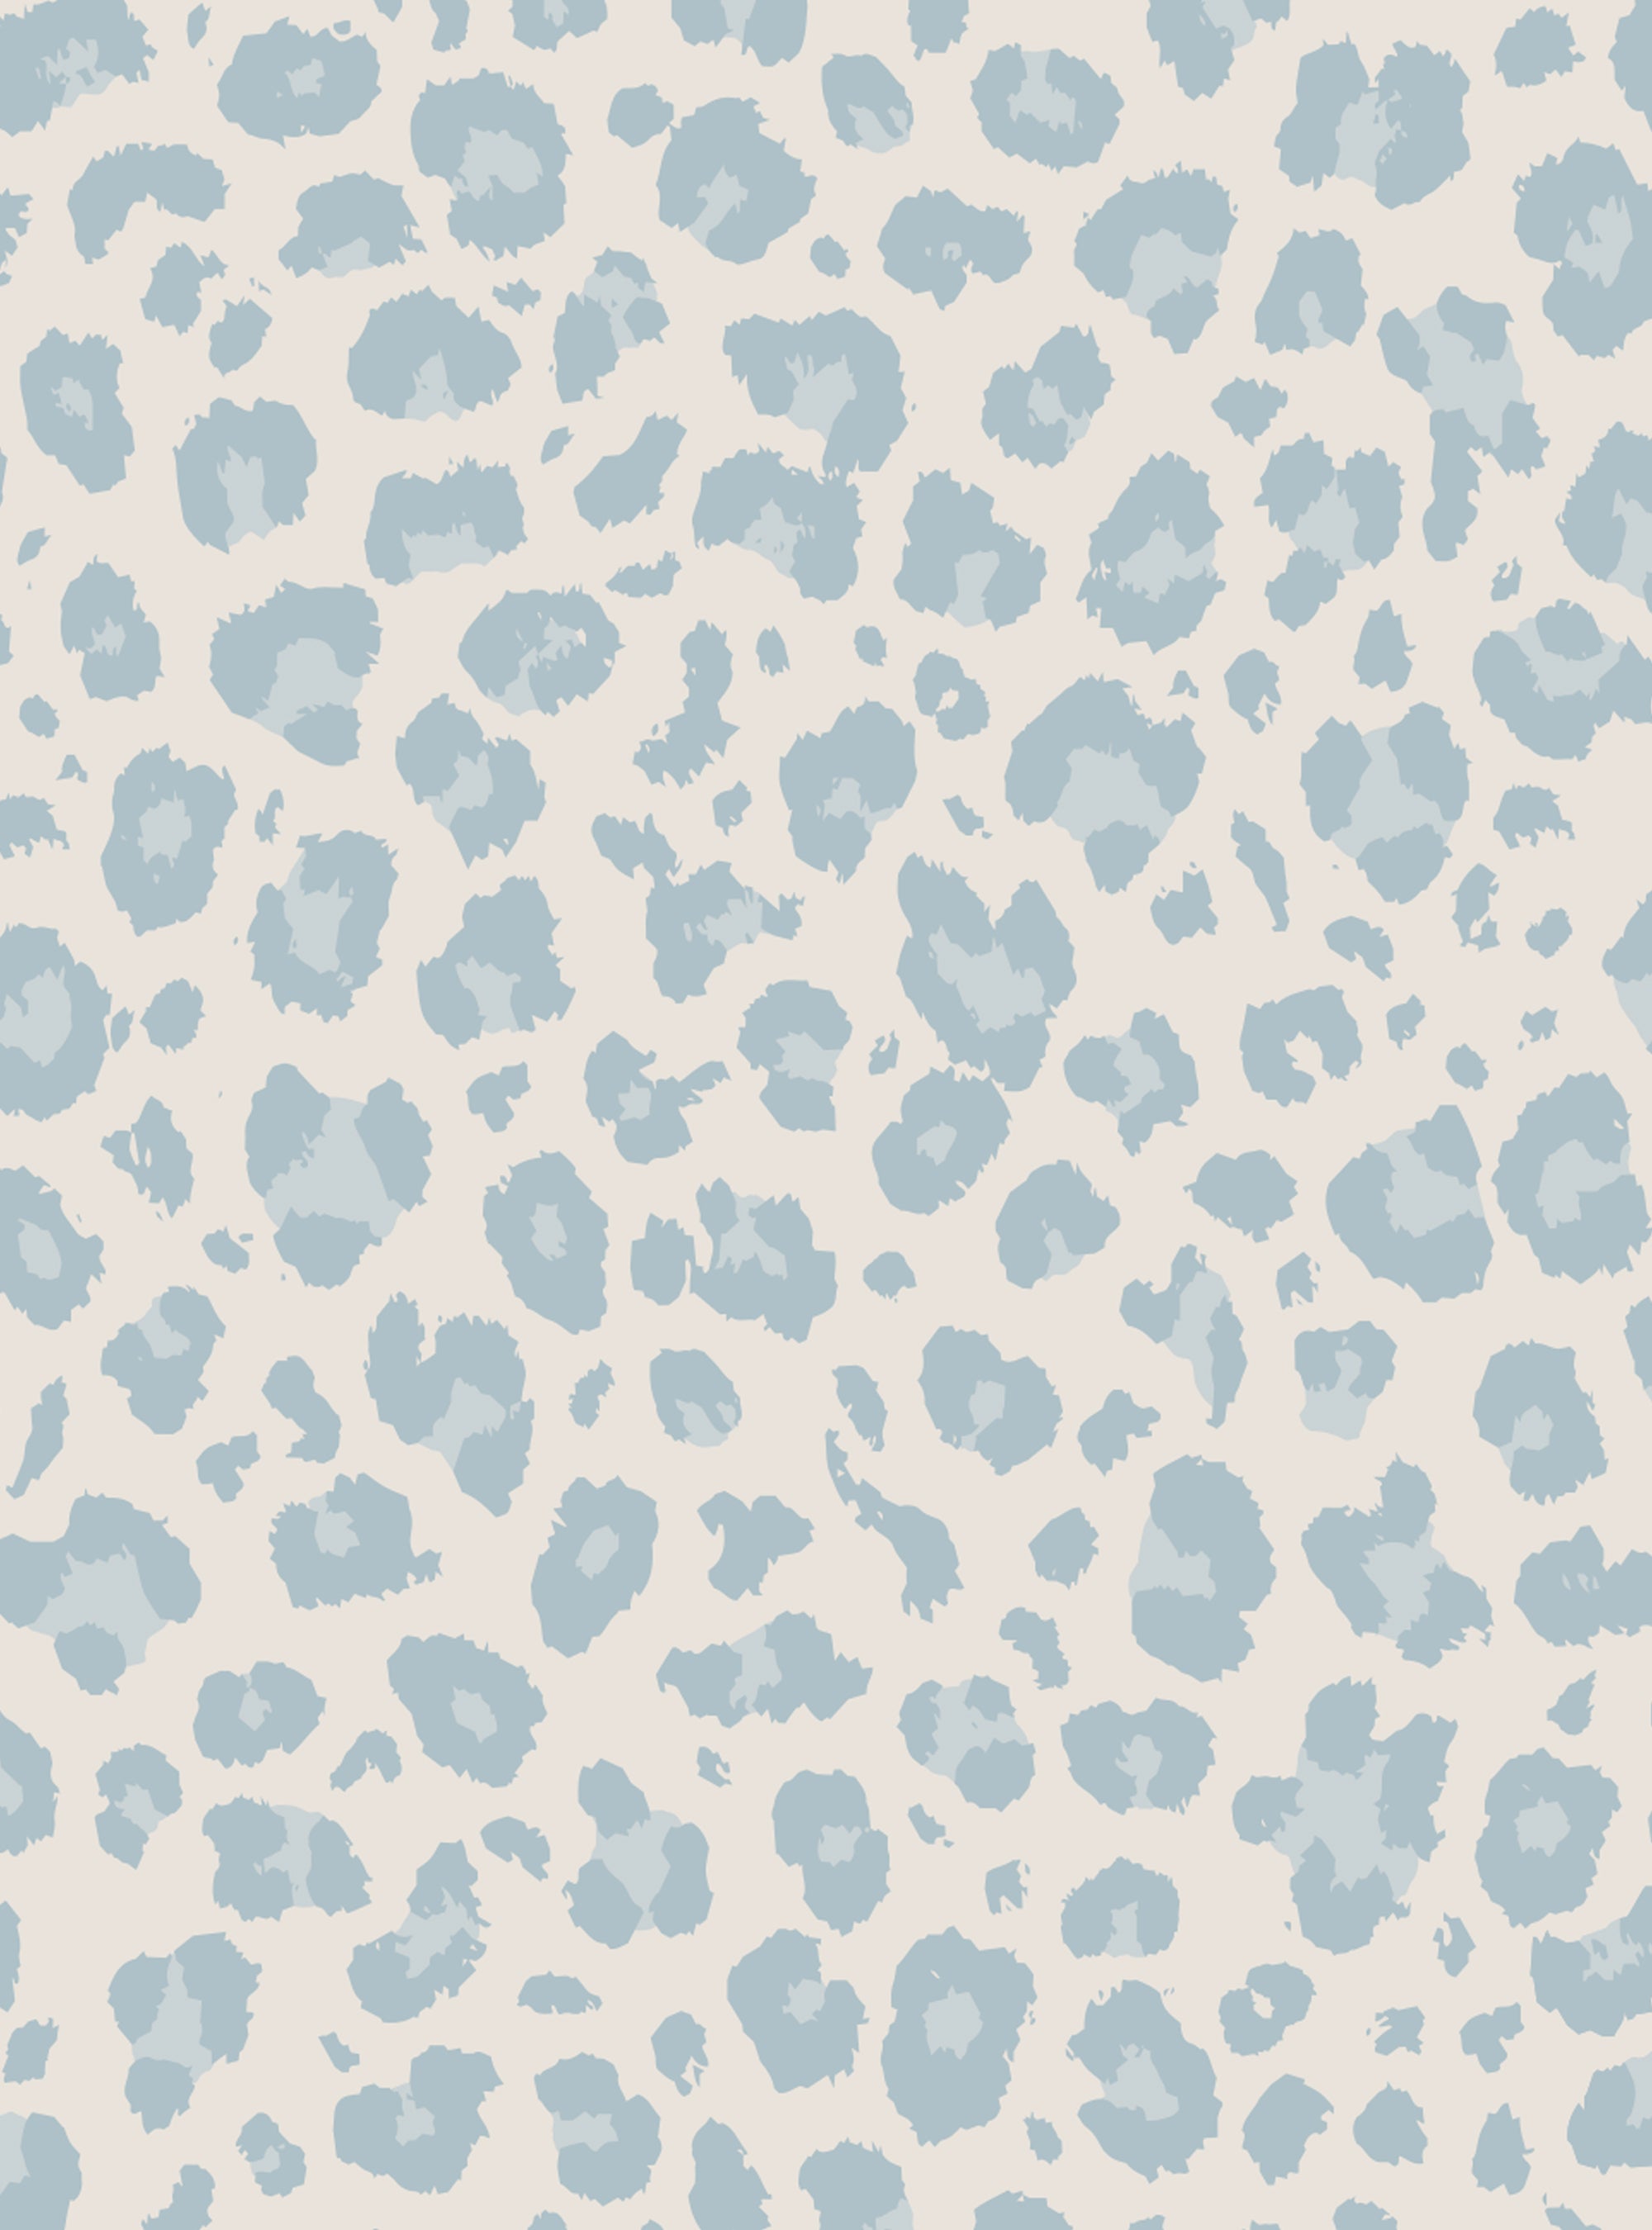 Animal Print Leopard Wallpaper - Peel and Stick – Simple Shapes